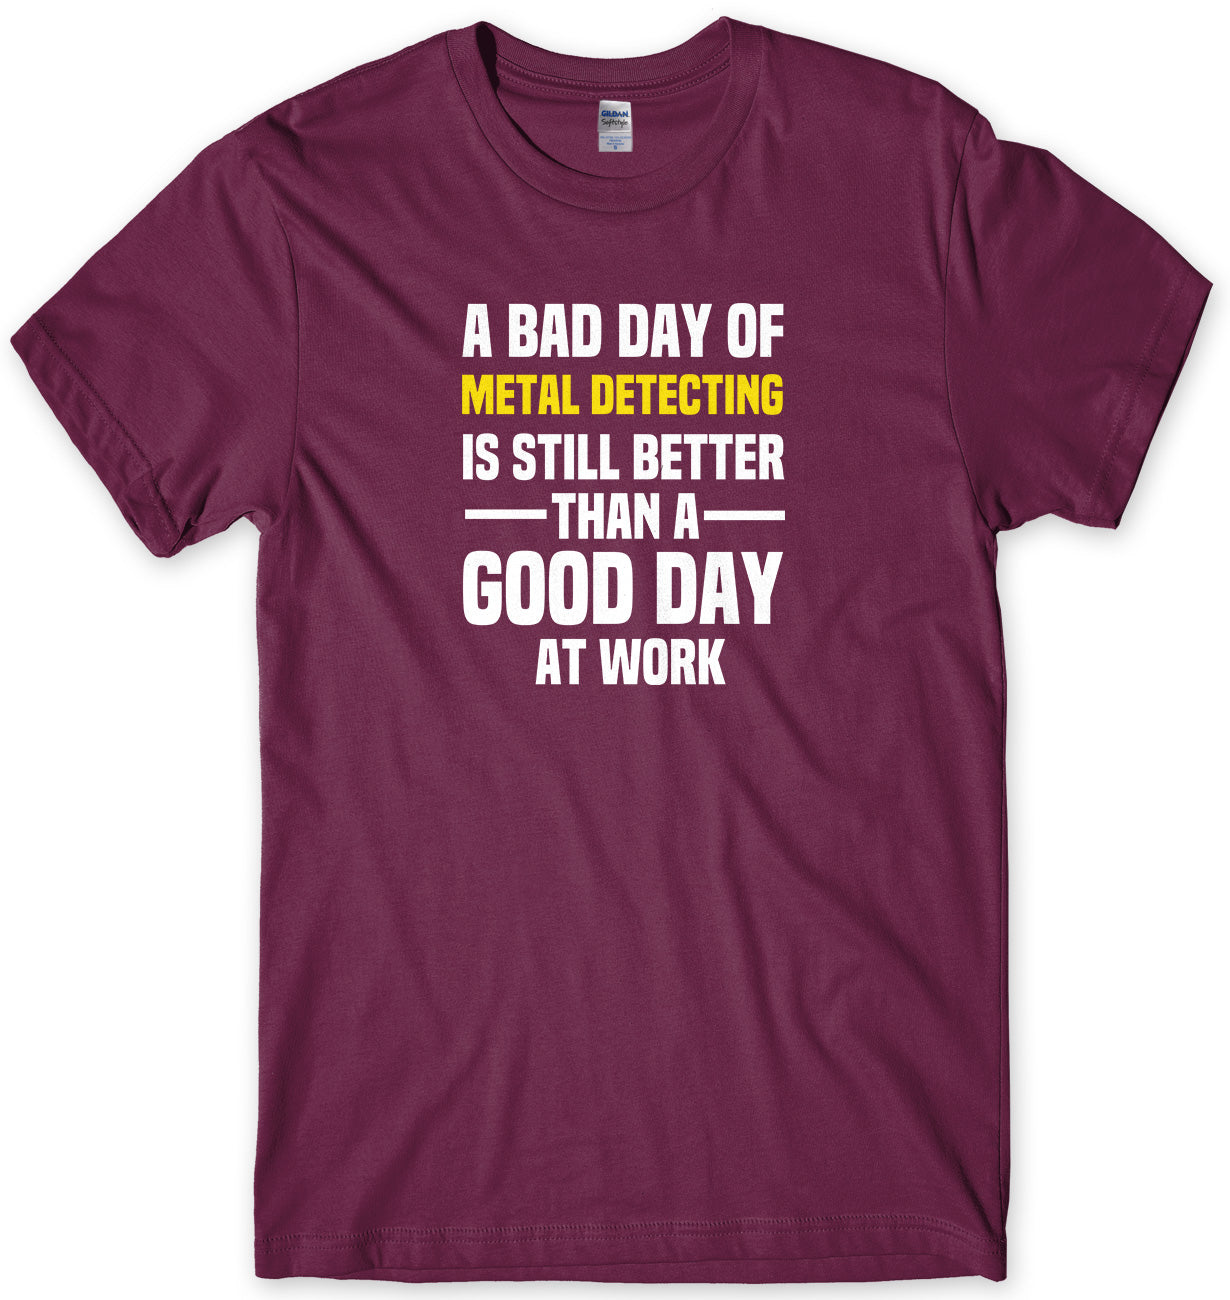 A BAD DAY OF METAL DETECTING IS STILL BETTER THAN A GOOD DAY AT WORK MENS FUNNY SLOGAN UNISEX T-SHIRT - StreetSide Surgeons